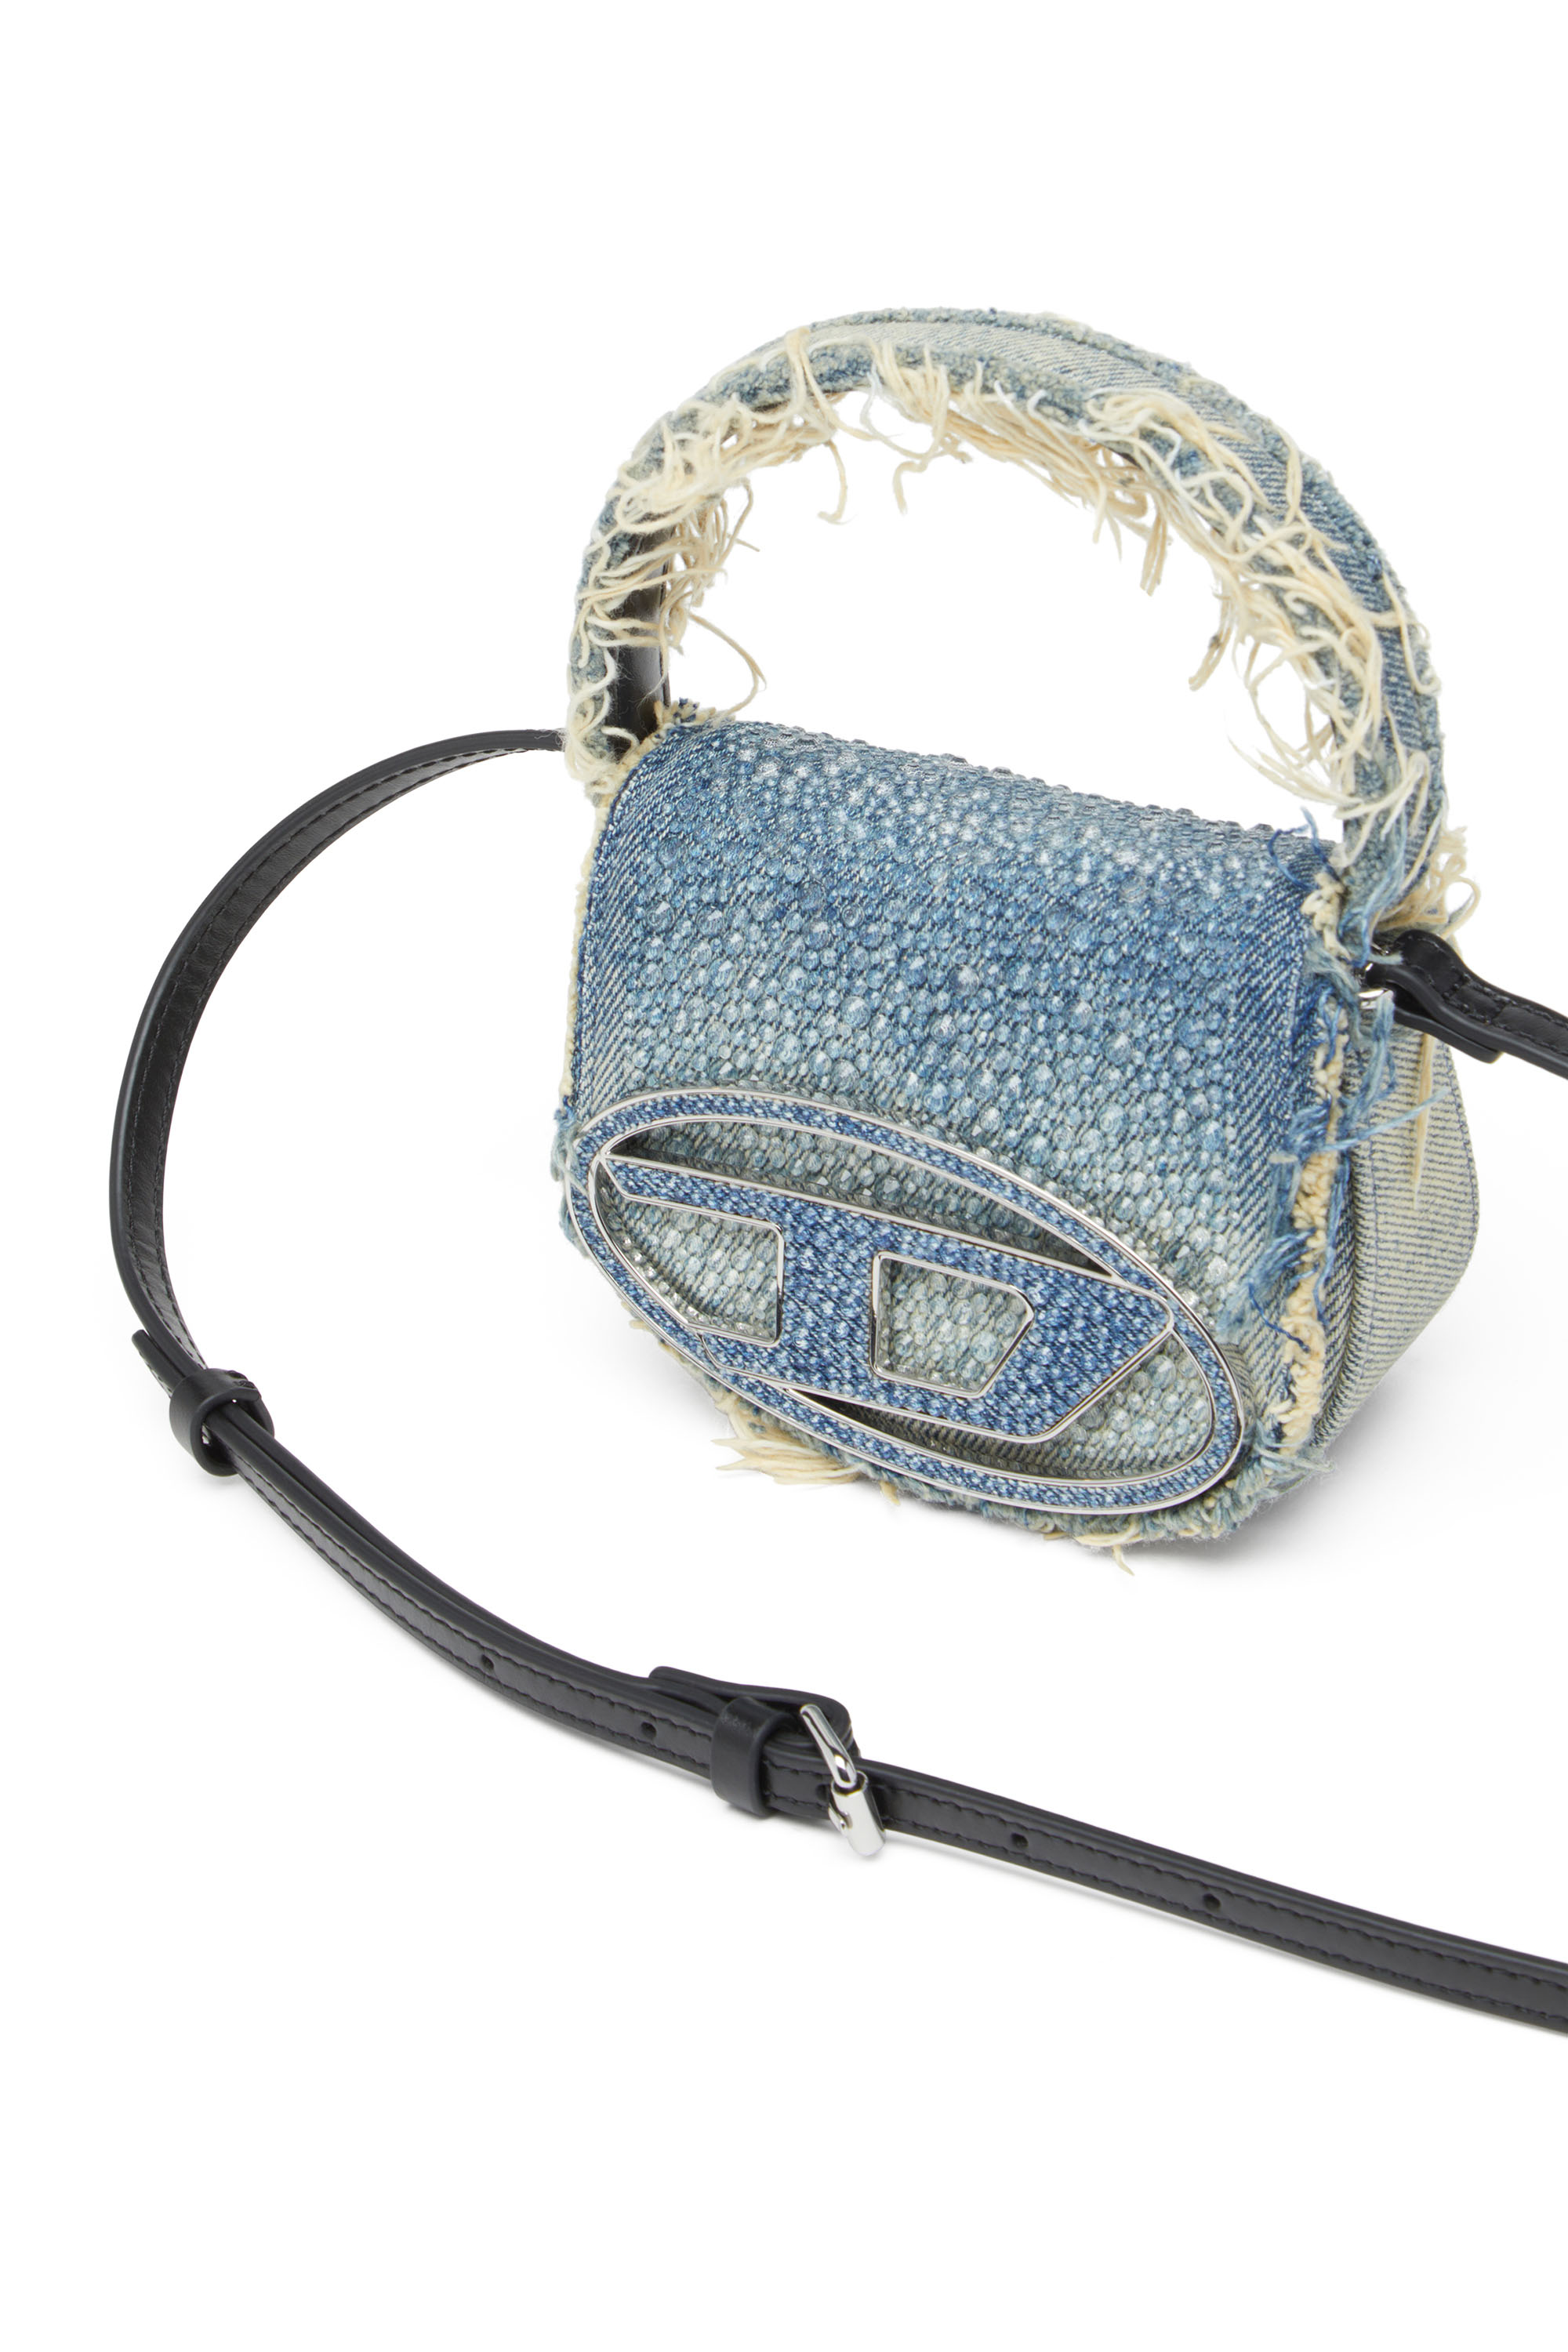 Diesel - 1DR XS, Female 1DR XS-Iconic mini bag in denim and crystals in ブルー - Image 5